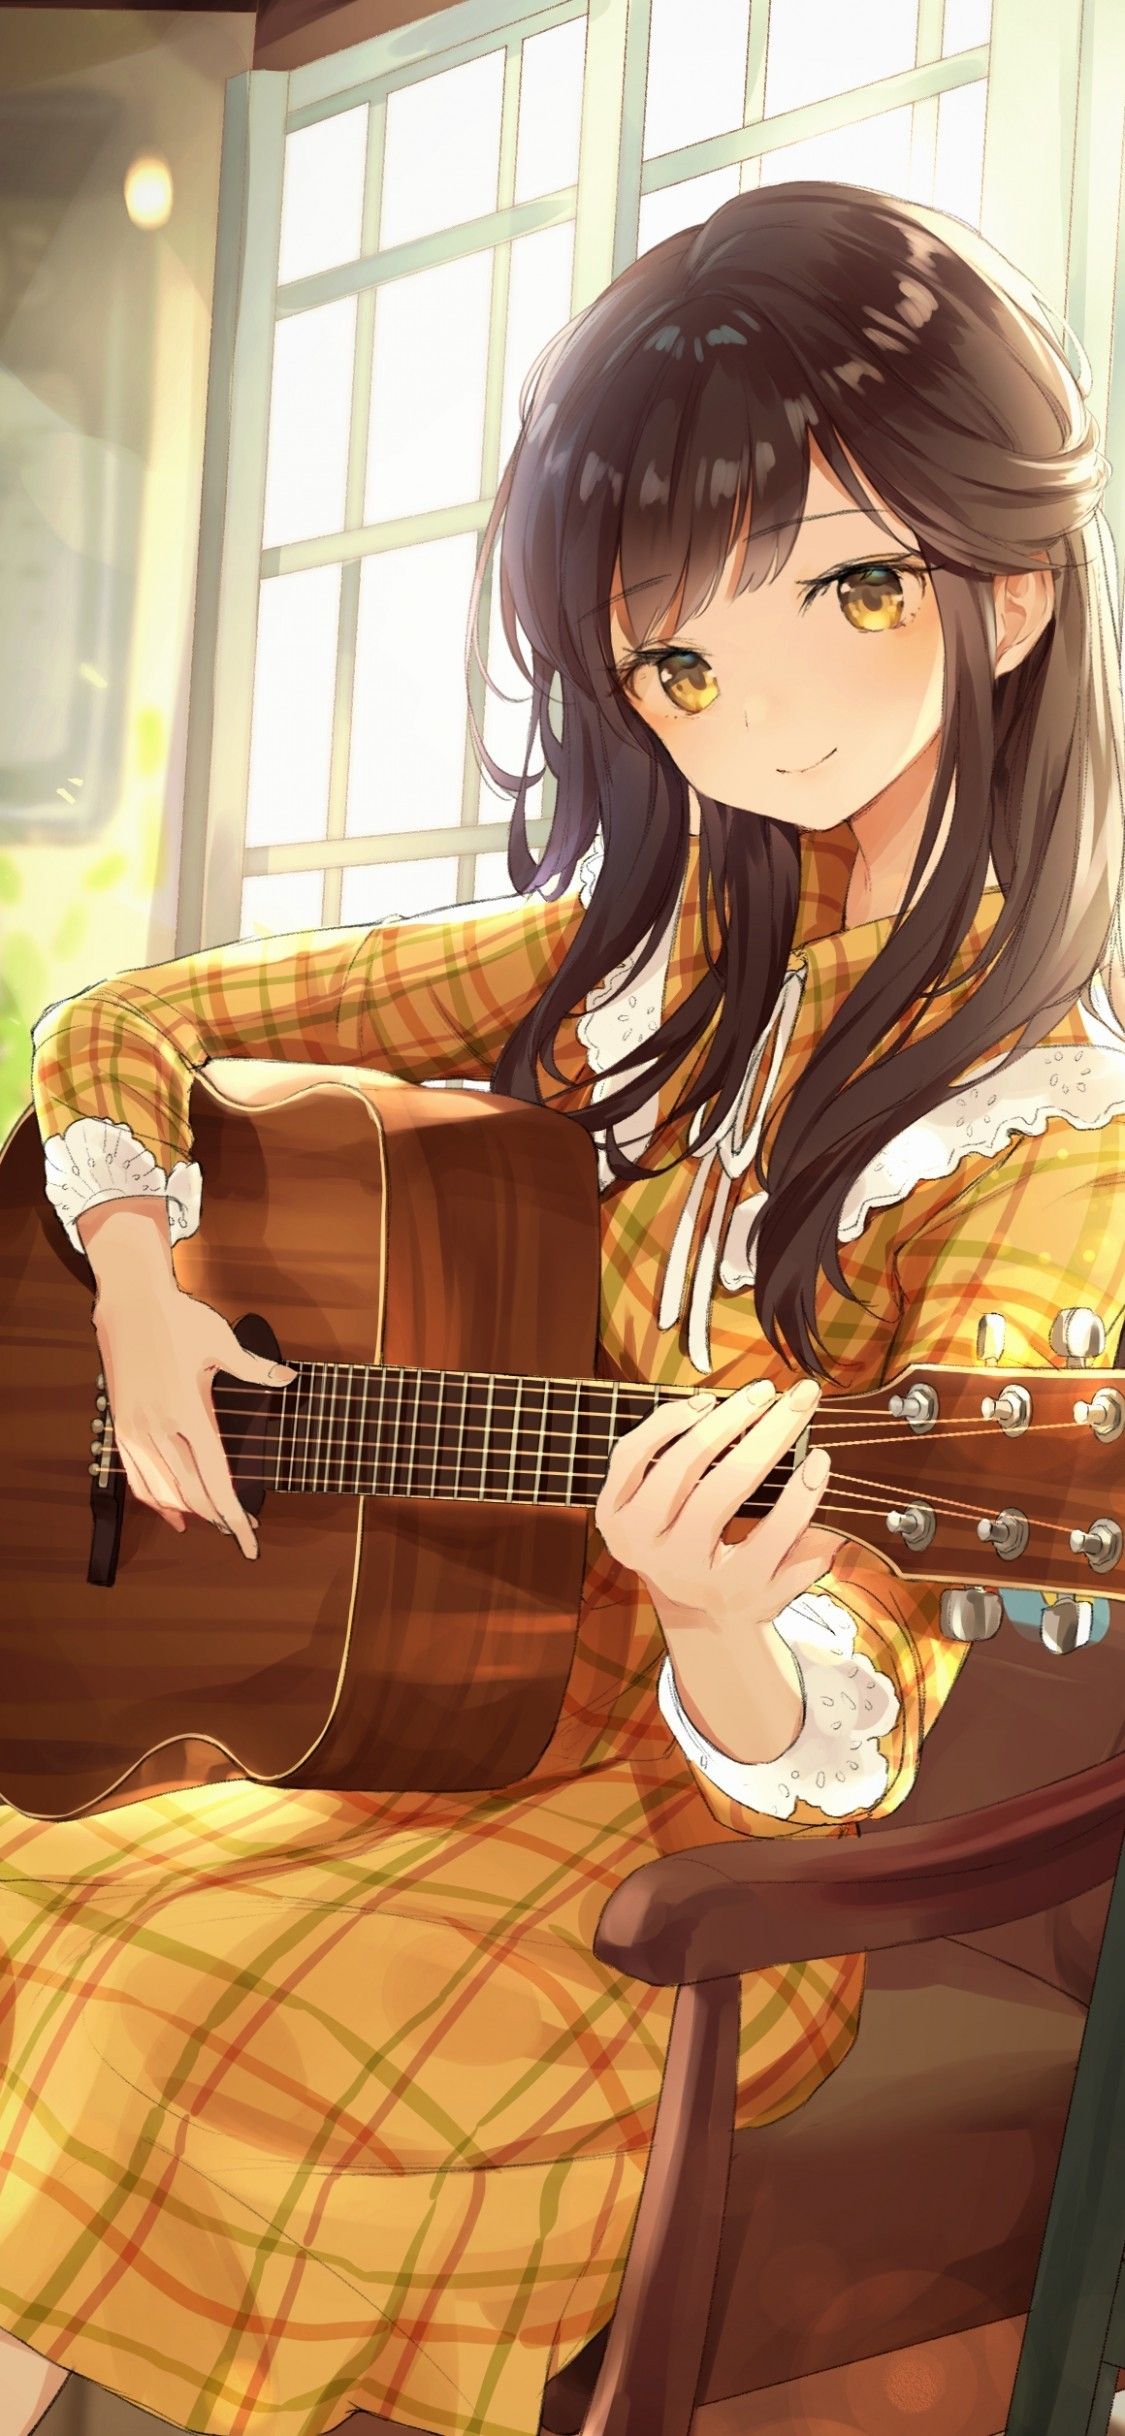 Acoustic Guitar Anime Wallpapers - Wallpaper Cave